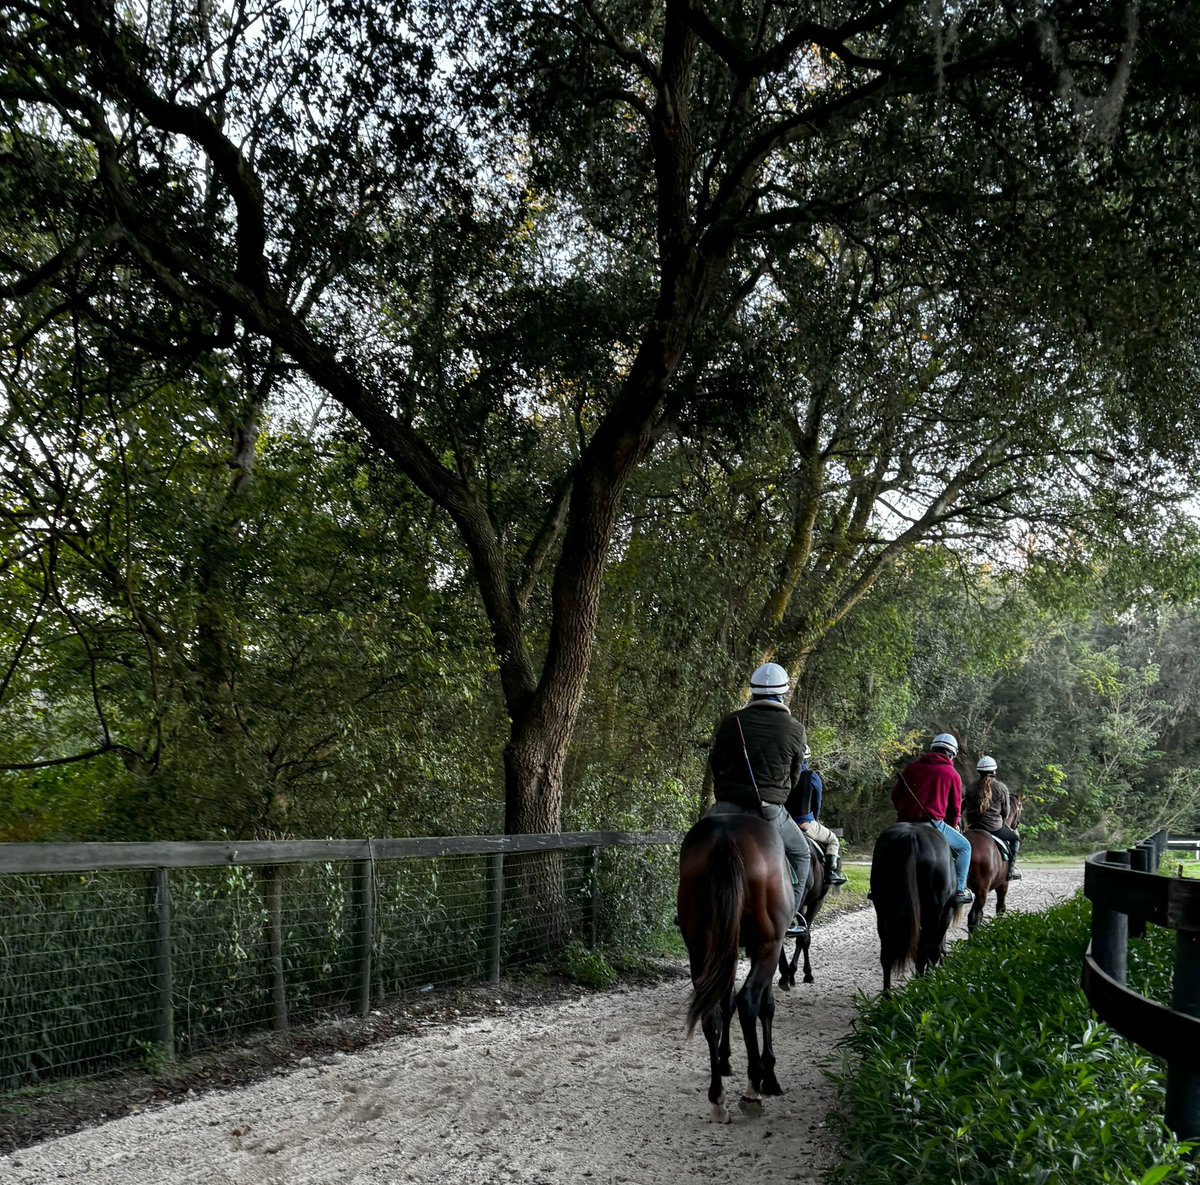 ☘️NIALL BRENNAN STABLES is one of the top Thoroughbred training facilities in the U.S. Located in Ocala, Florida, the facility is on lush, rich land decorated with beautiful old oak trees, offering more than 100 acres of turnout paddocks. #SuccessIsNoAccident